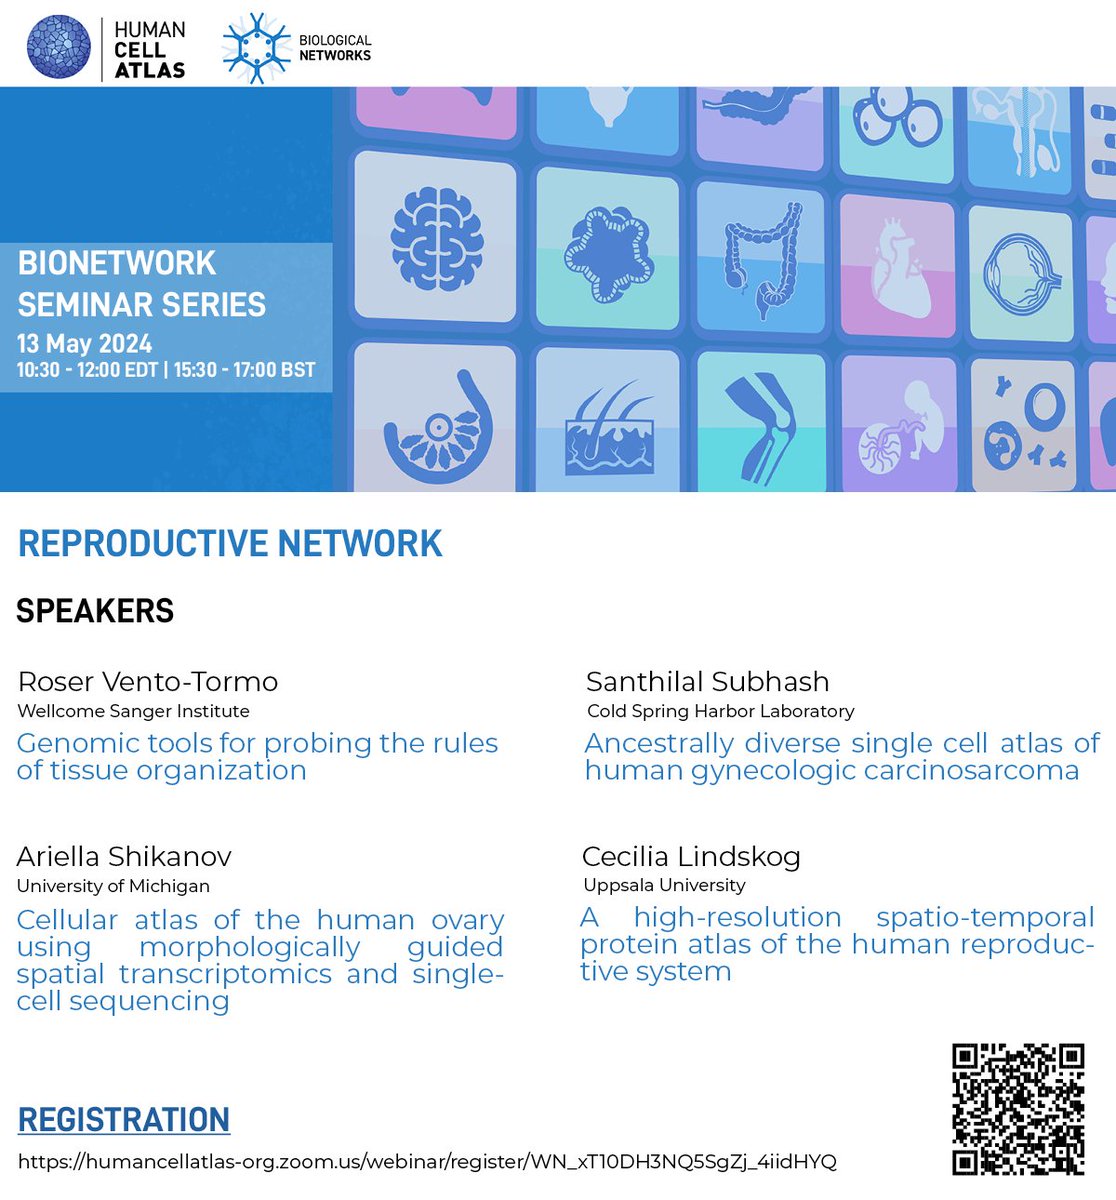 Don’t forget to register for next week’s HCA Biological Network Seminar featuring the Reproduction Bionetwork. Monday,13 May 10:30-12:00 EDT / 15:30-17:00 BST. Register at: humancellatlas-org.zoom.us/webinar/regist…